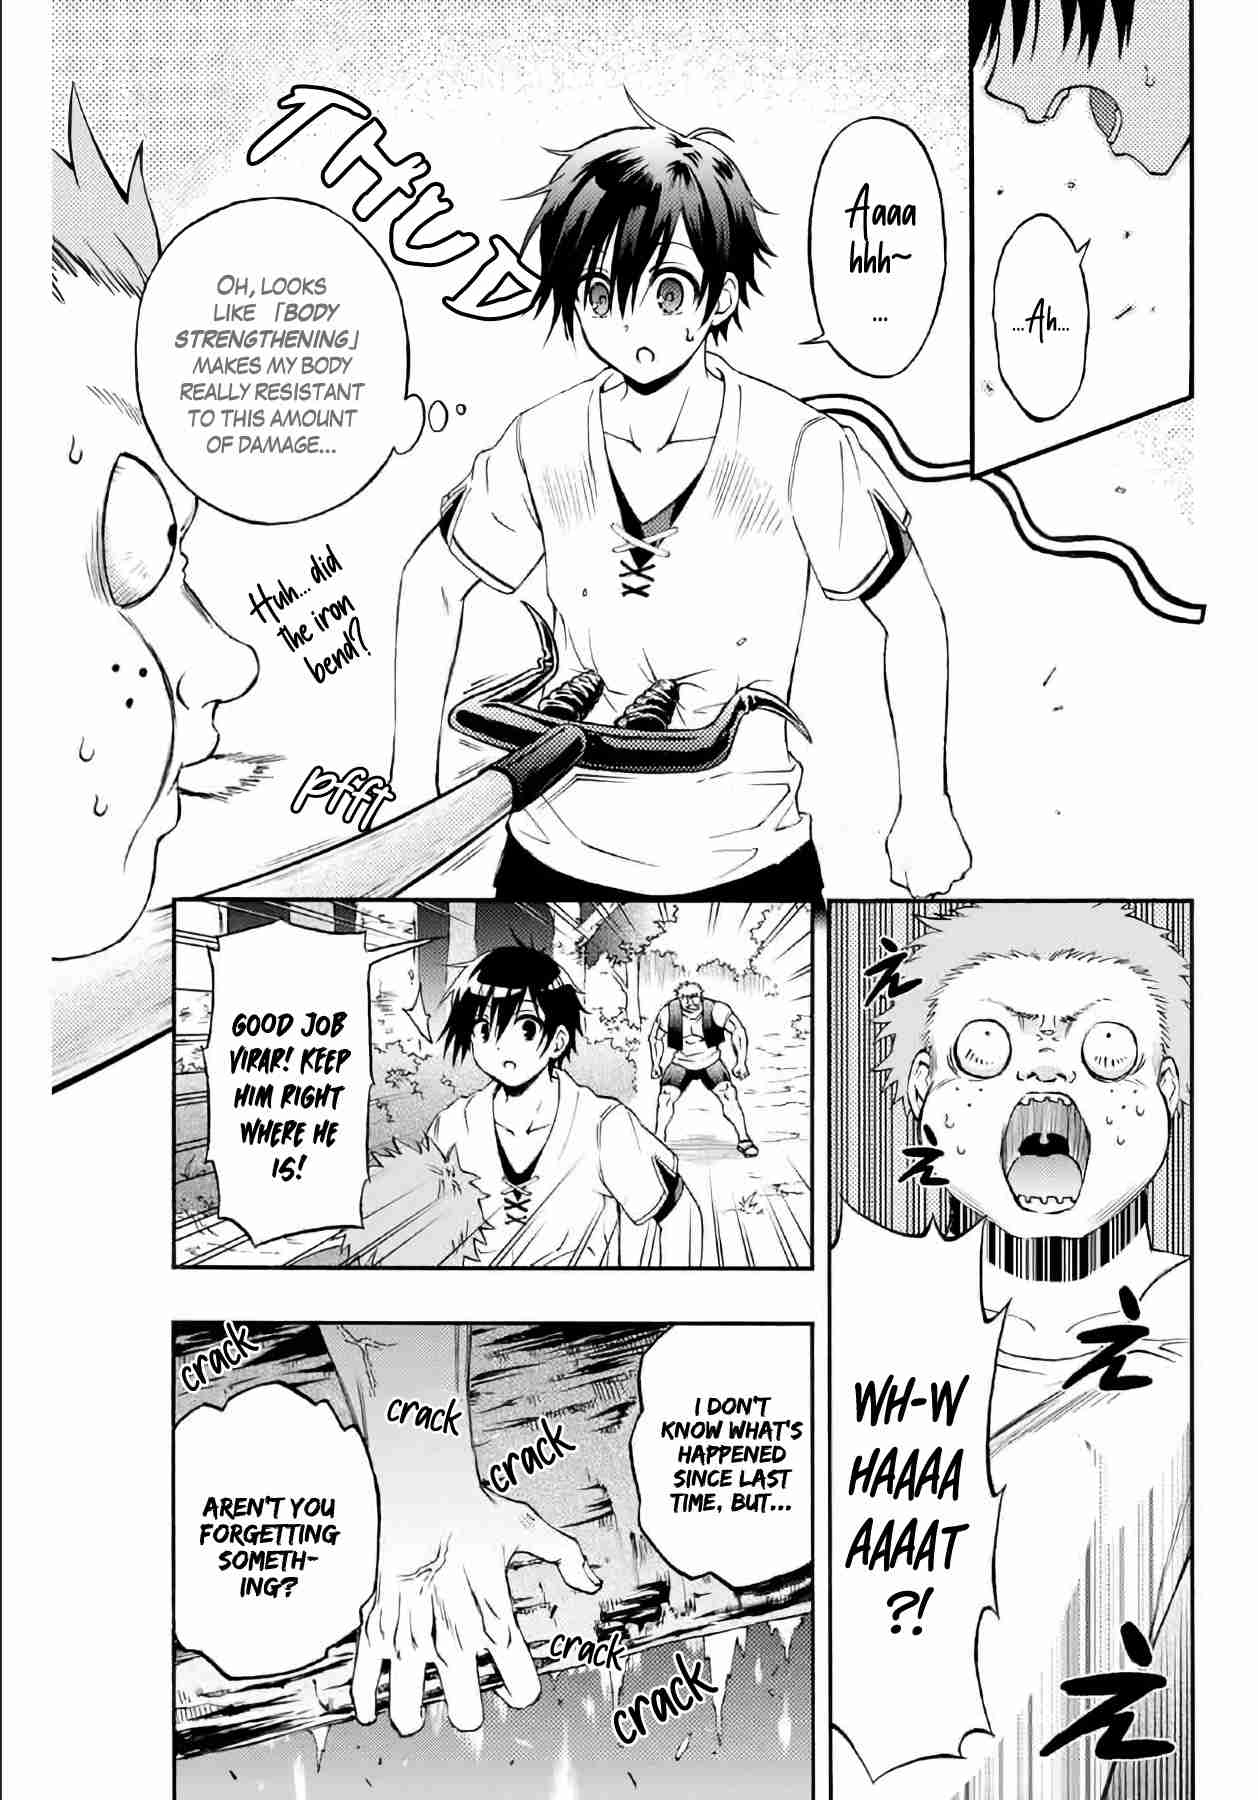 Inferior Magic Swordsman: Using the Skill Board to Become the Strongest Vol. 1 Ch. 4 Three suspicious persons